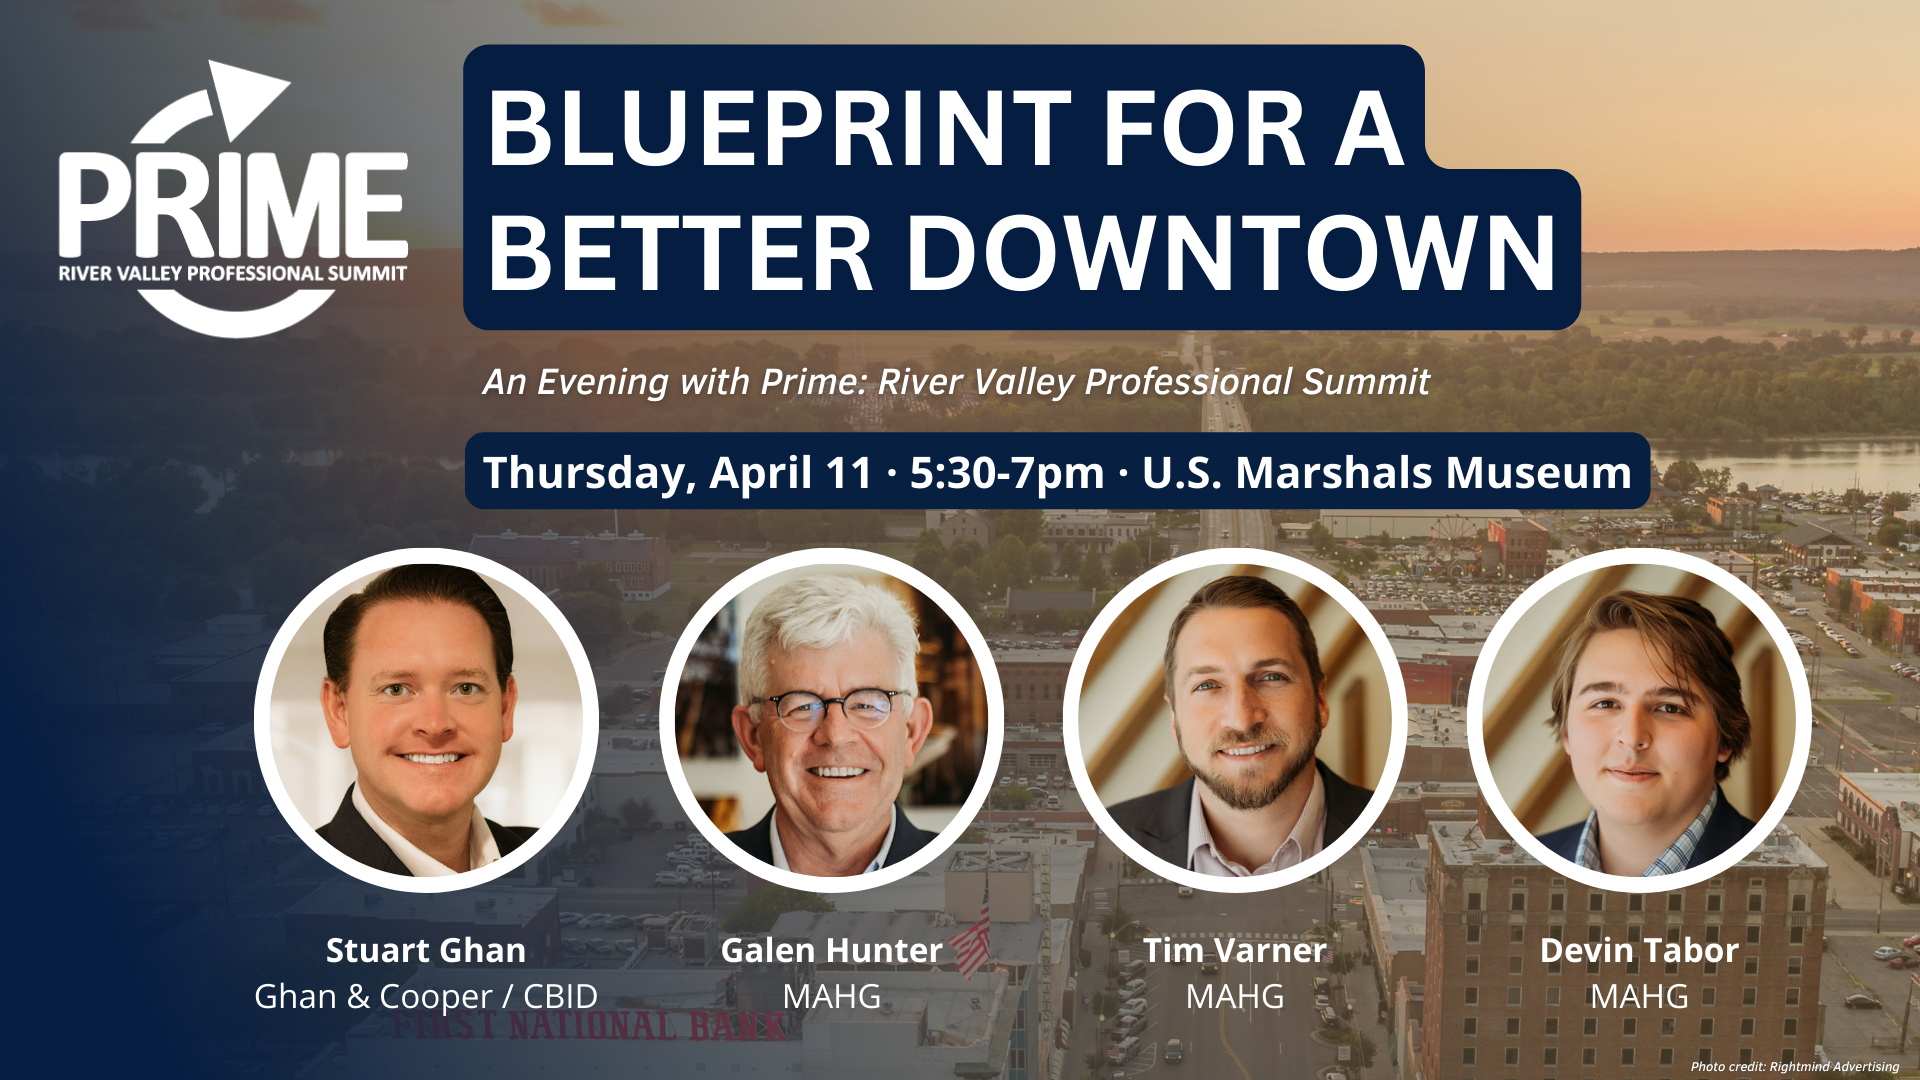 Blueprint for a Better Downtown Event Announced